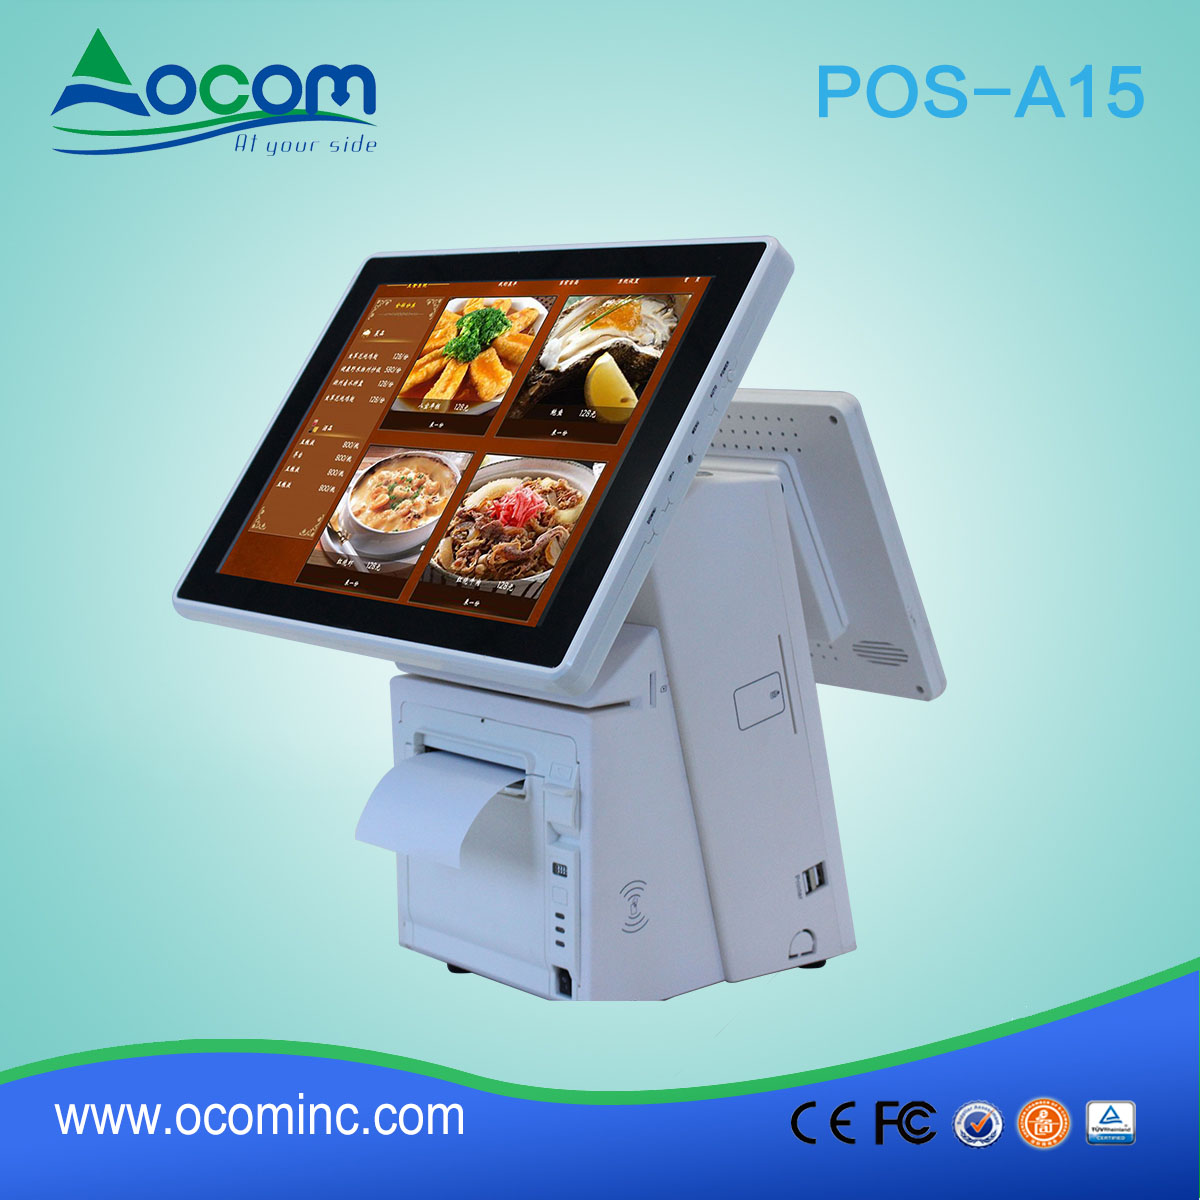 POS-A15---China Factory made in One Touch Screen POS Terminal mit Thermal Printer Machine